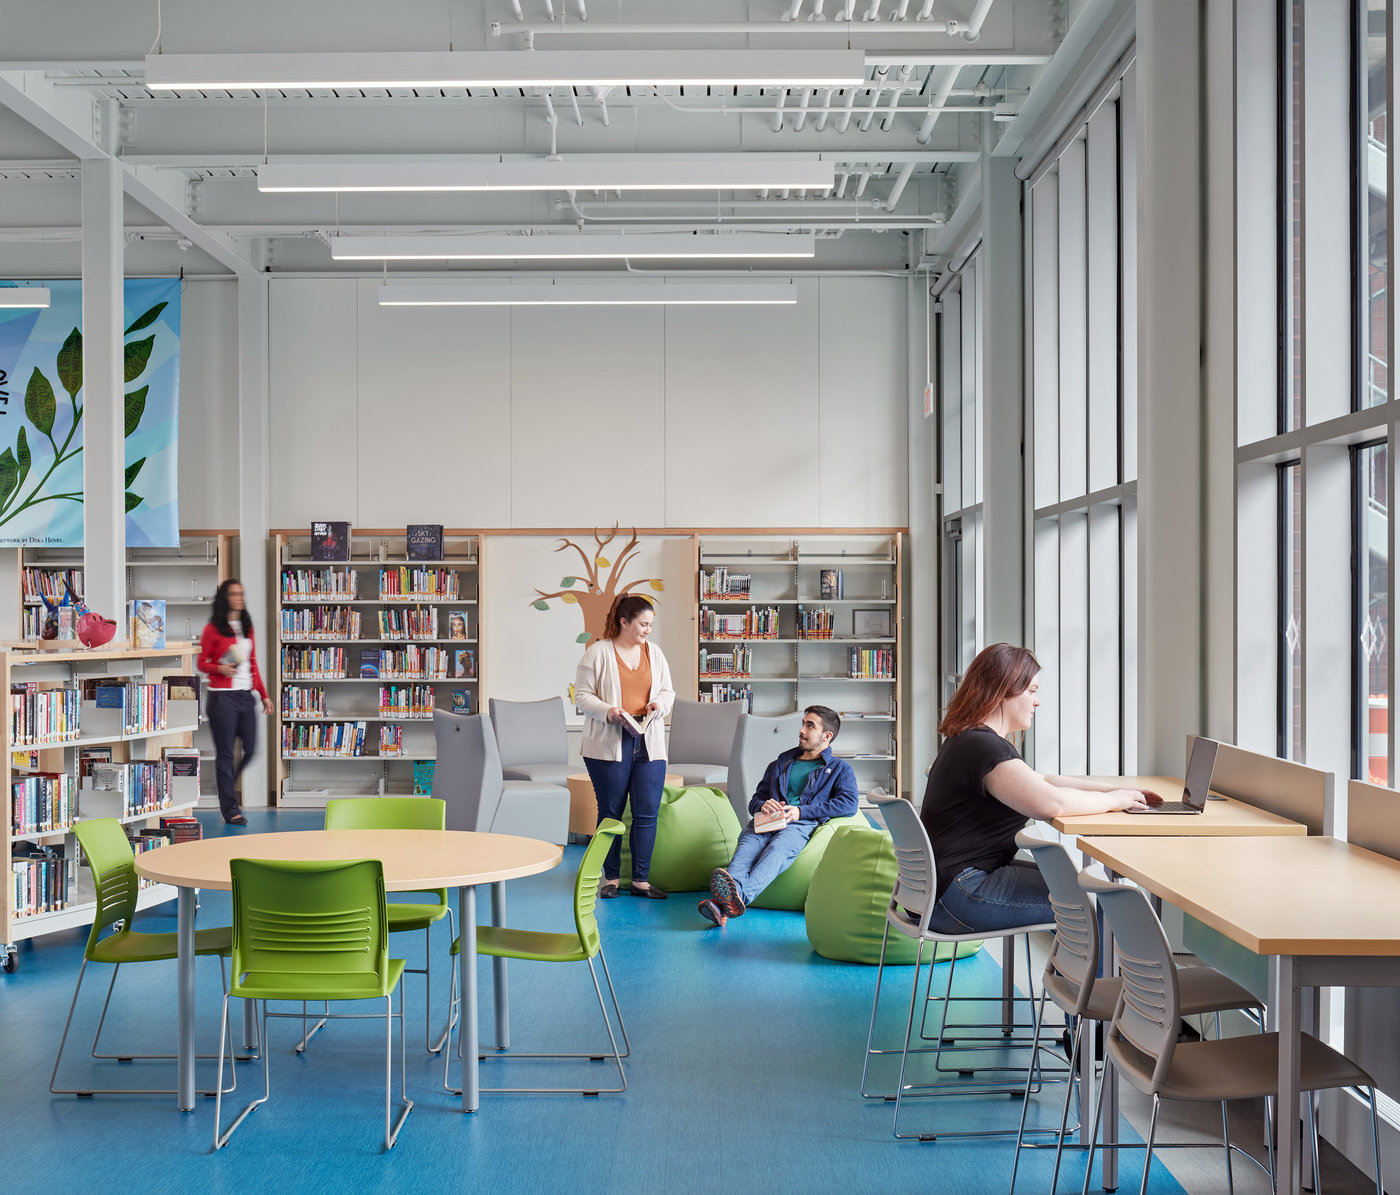 5 hartford public library park street branch library interior seating teen area 1400 xxx q85